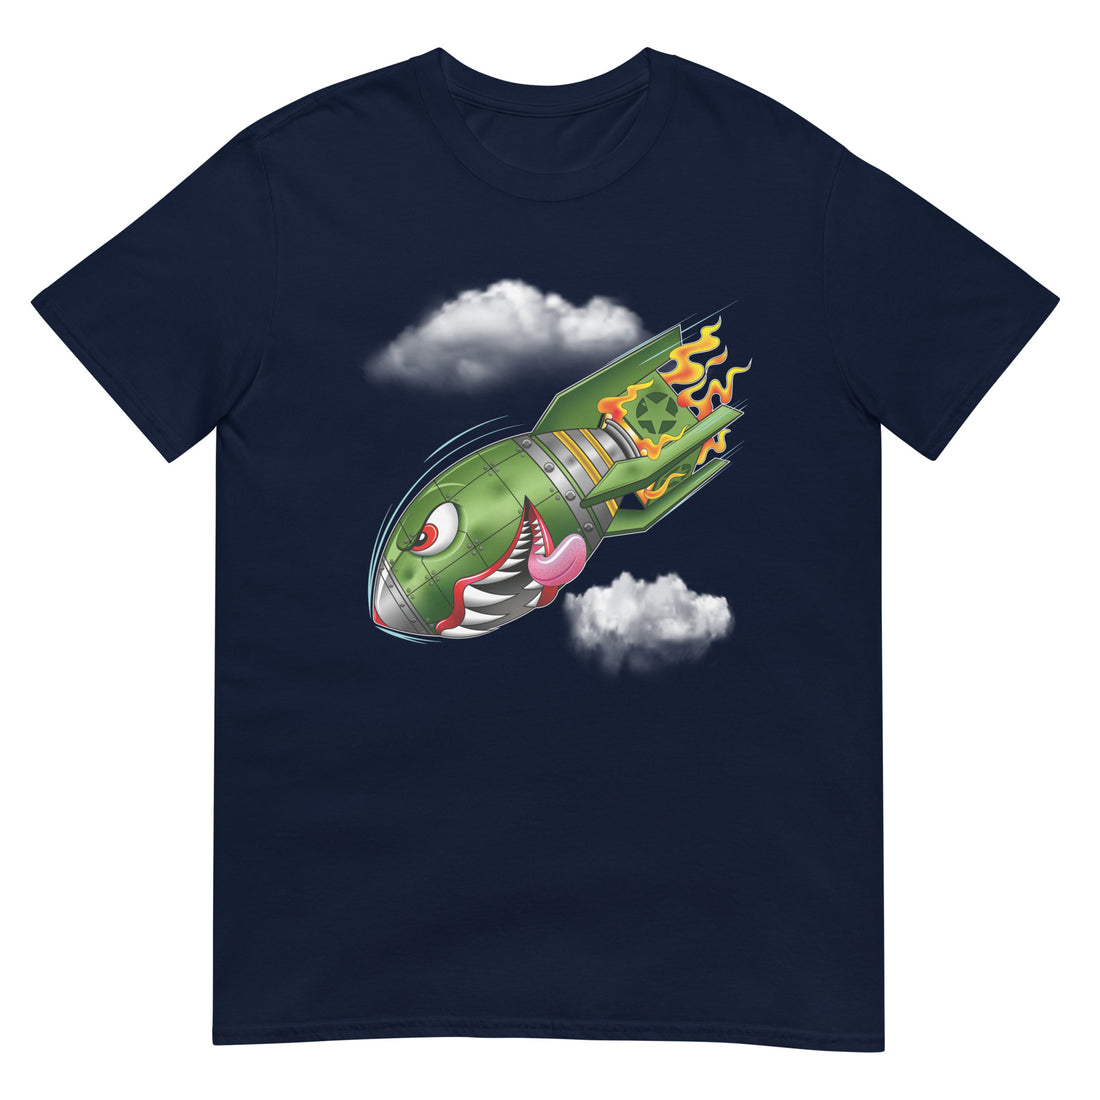 A navy blue t-shirt with a military green neo-traditional bomb tattoo design. The bomb is falling with a look of determination in its eyes, an evil toothy grin, and its tongue hanging out of its mouth. Flames are coming from the back of the bomb, and some clouds are in the background.